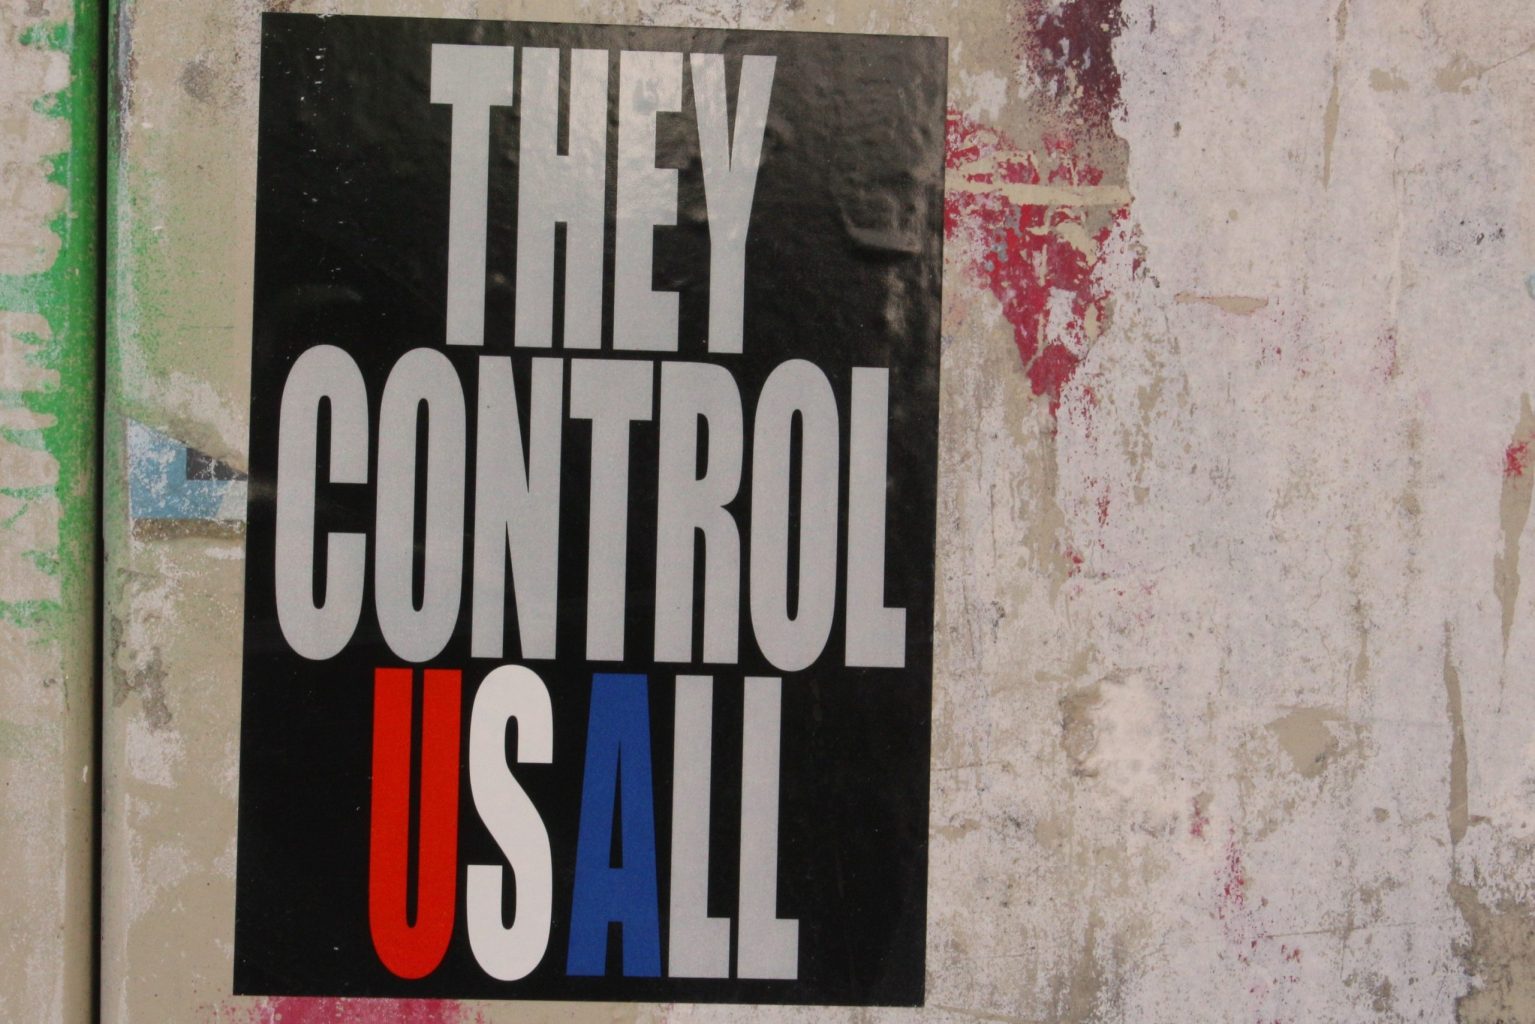 They Control USAll